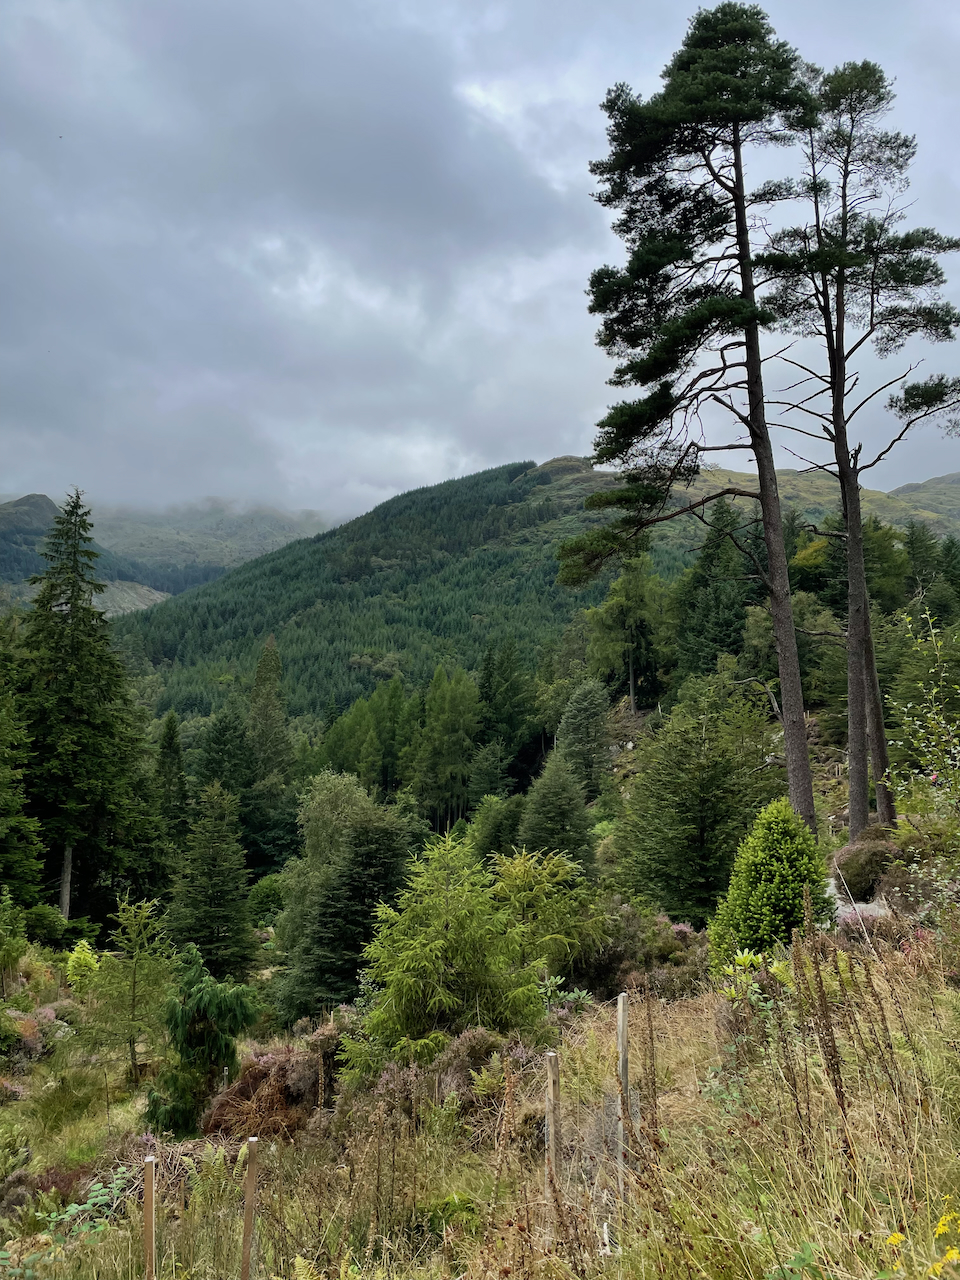 The Chilean Rainforest at Benmore (Copyright of The Garden Ninja)